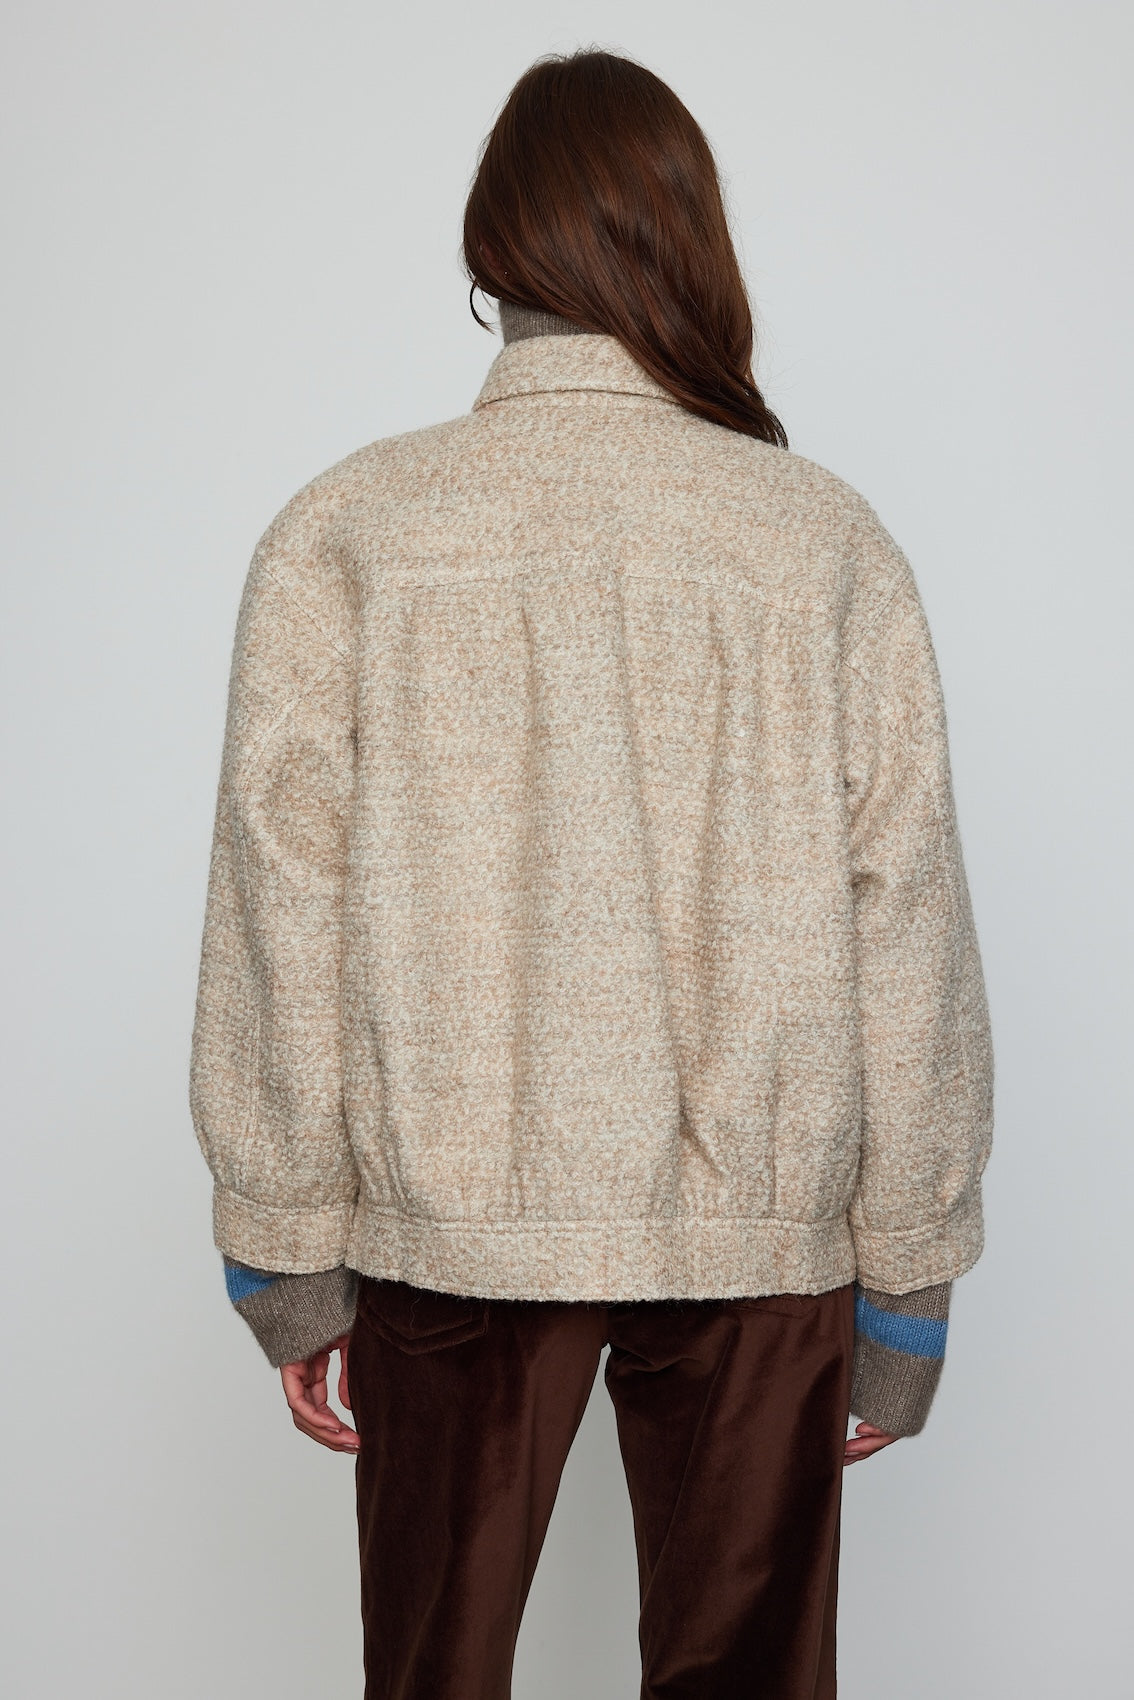 Caro Editions Mimi Jacket in wool boucle. A rounded shape inspired by the 80s with big round buttons.